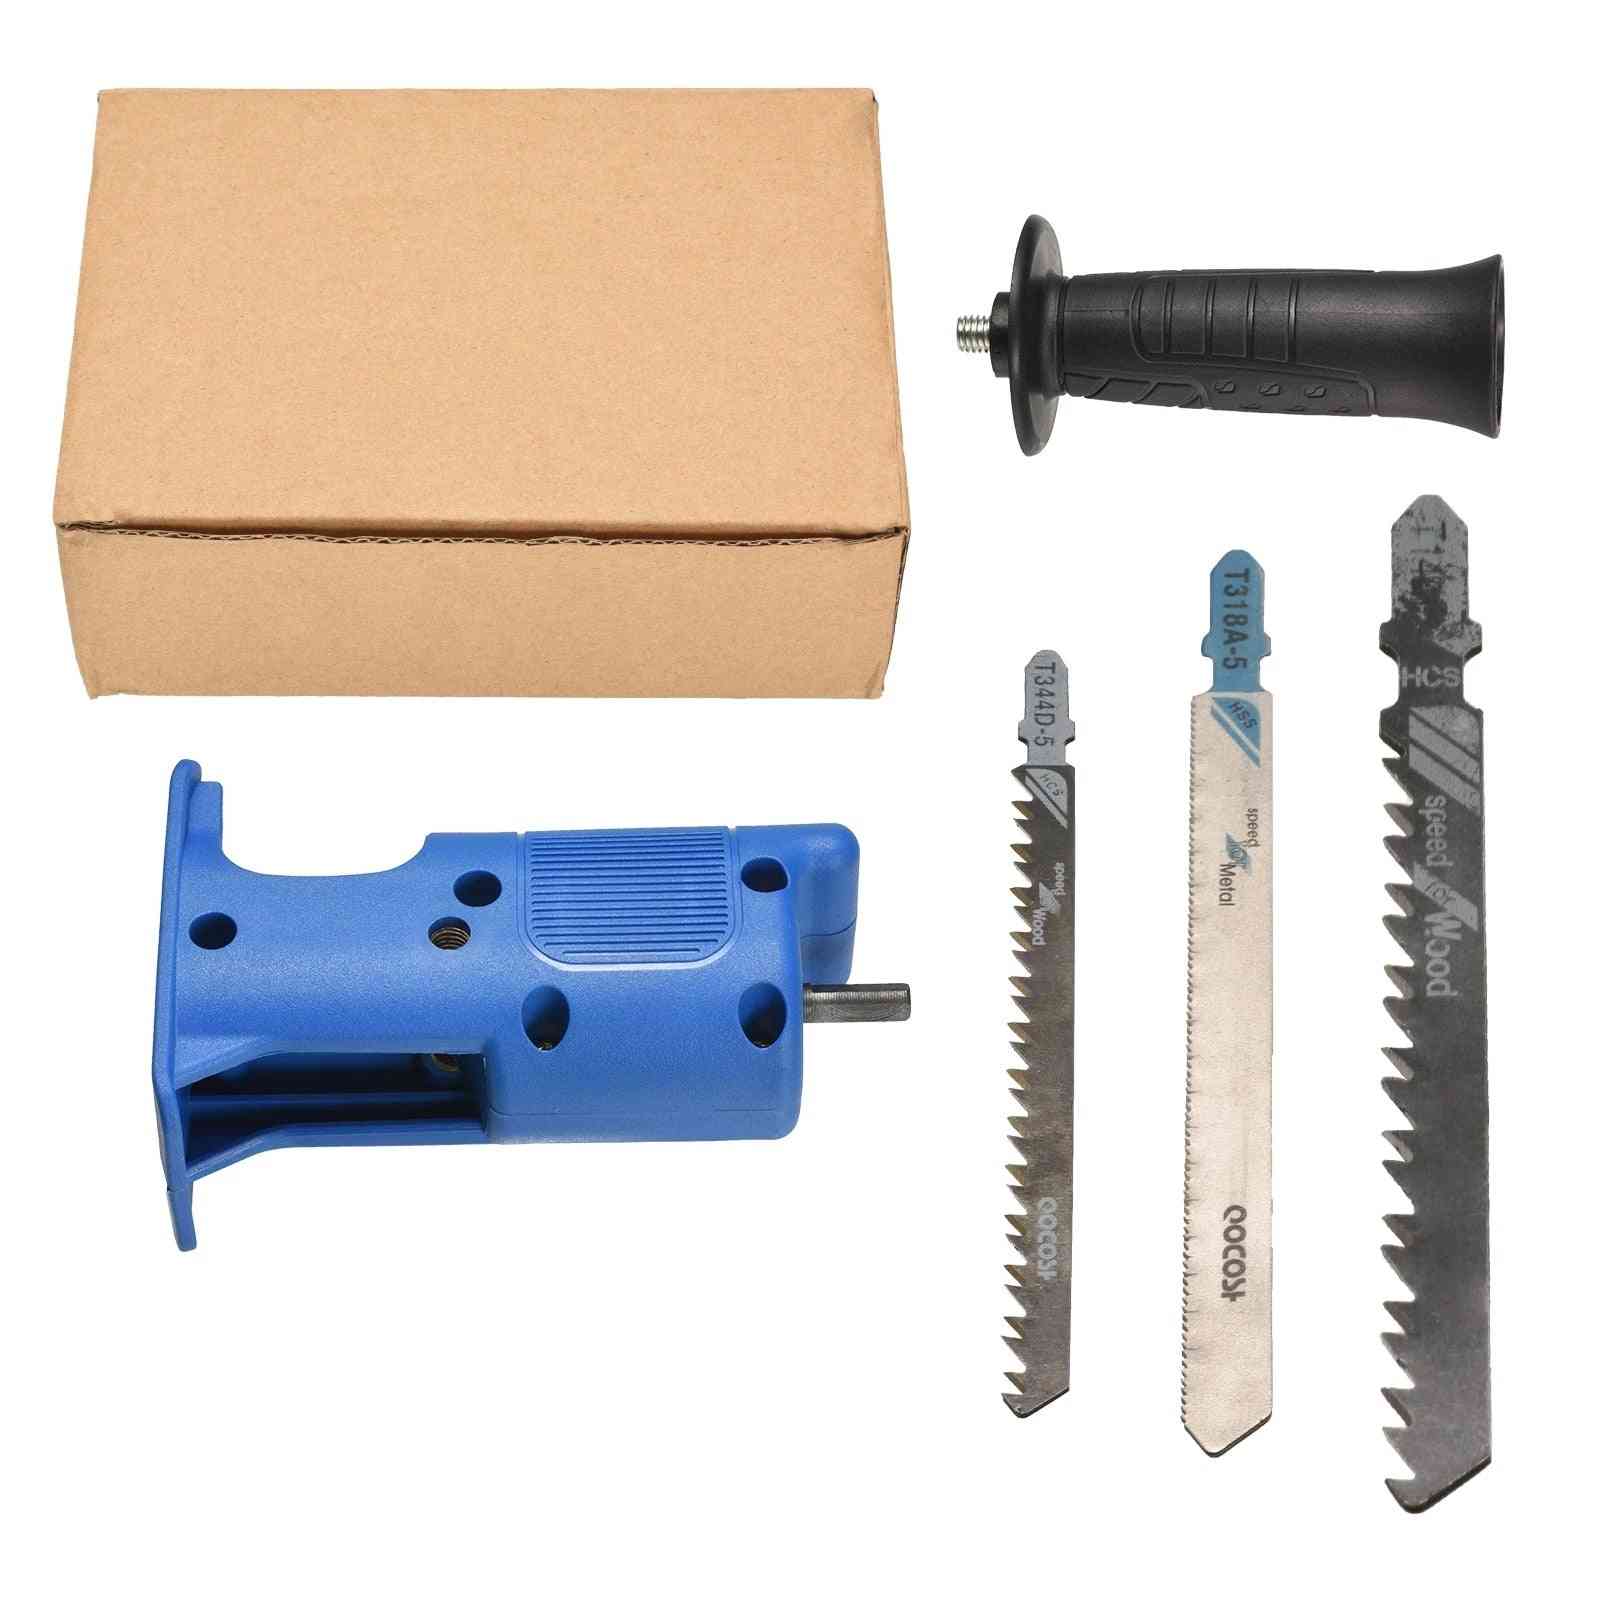 Reciprocating Saw Adapter Electric Drill Attachment Tool Saws Blades For Wood Metal Cutting Turning Modified Woodworking Tools